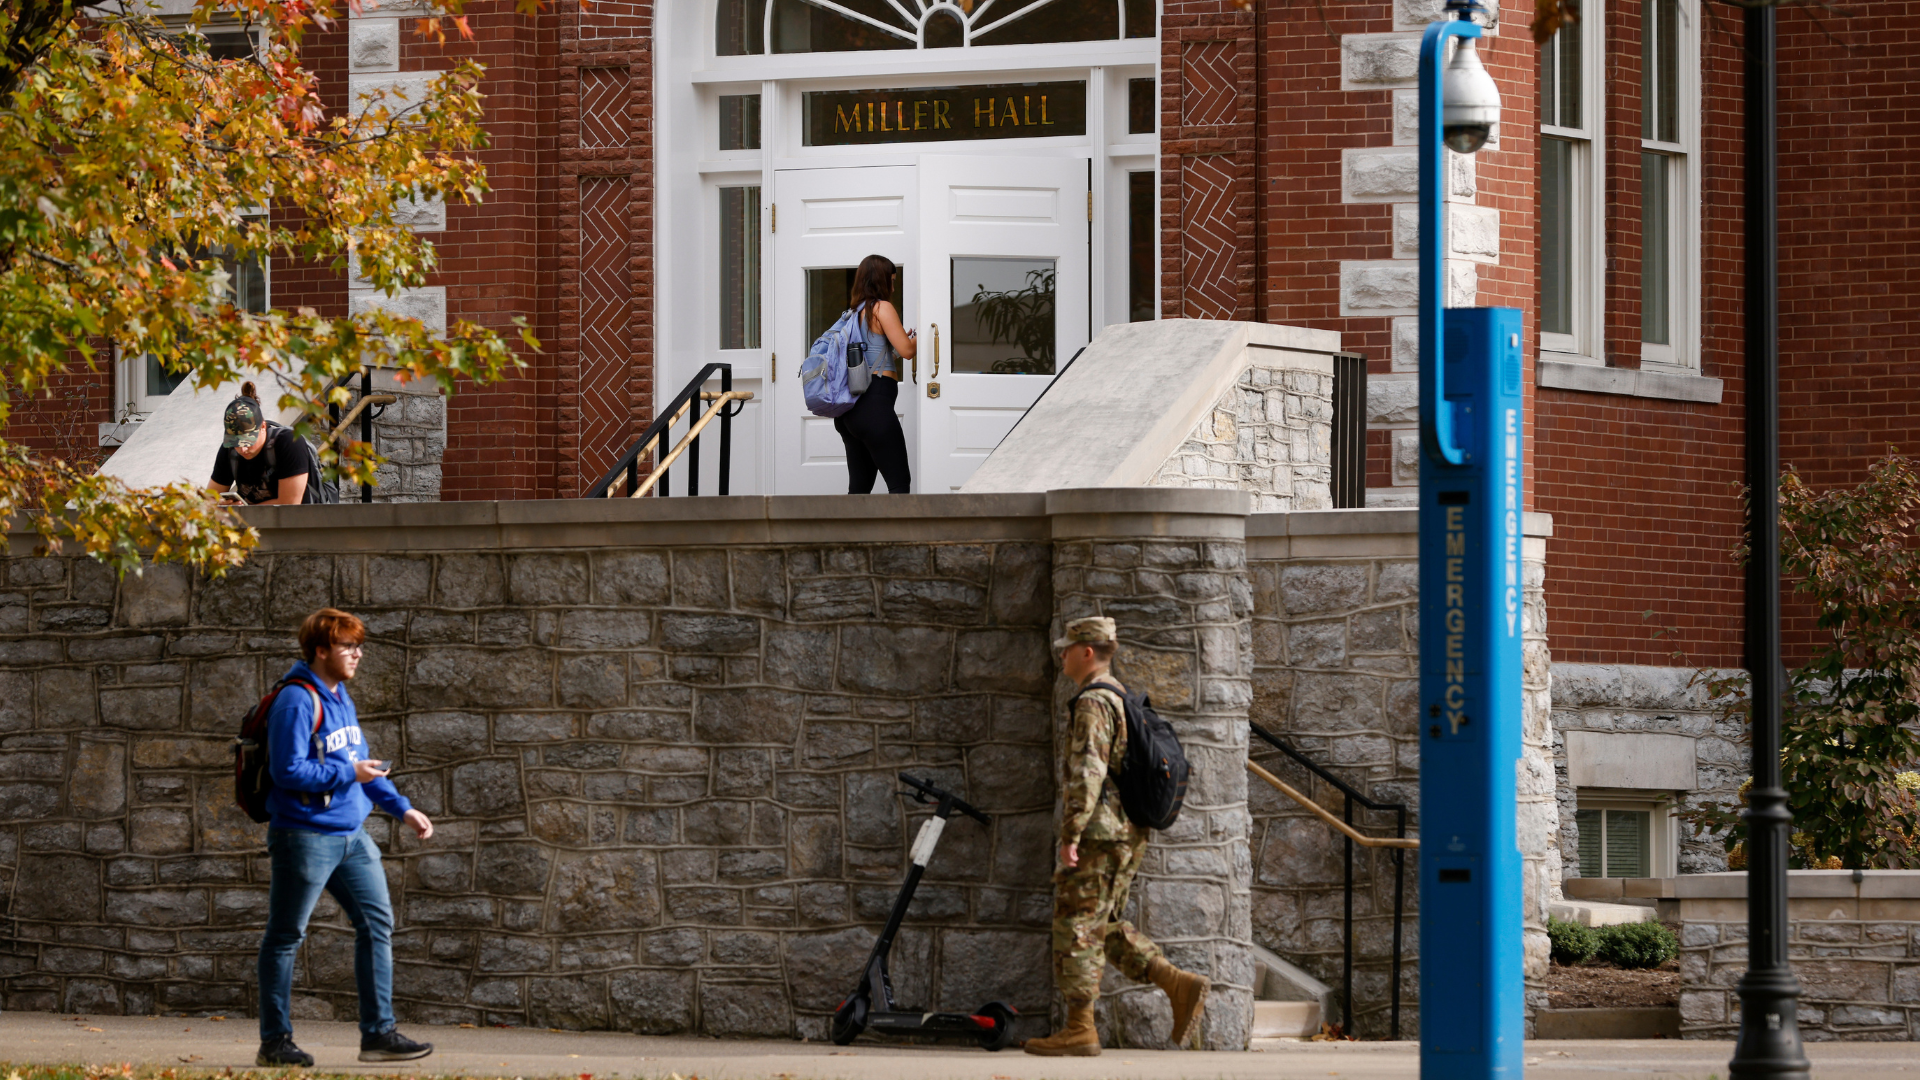 Four students walking around Miller Hall (building on campus)